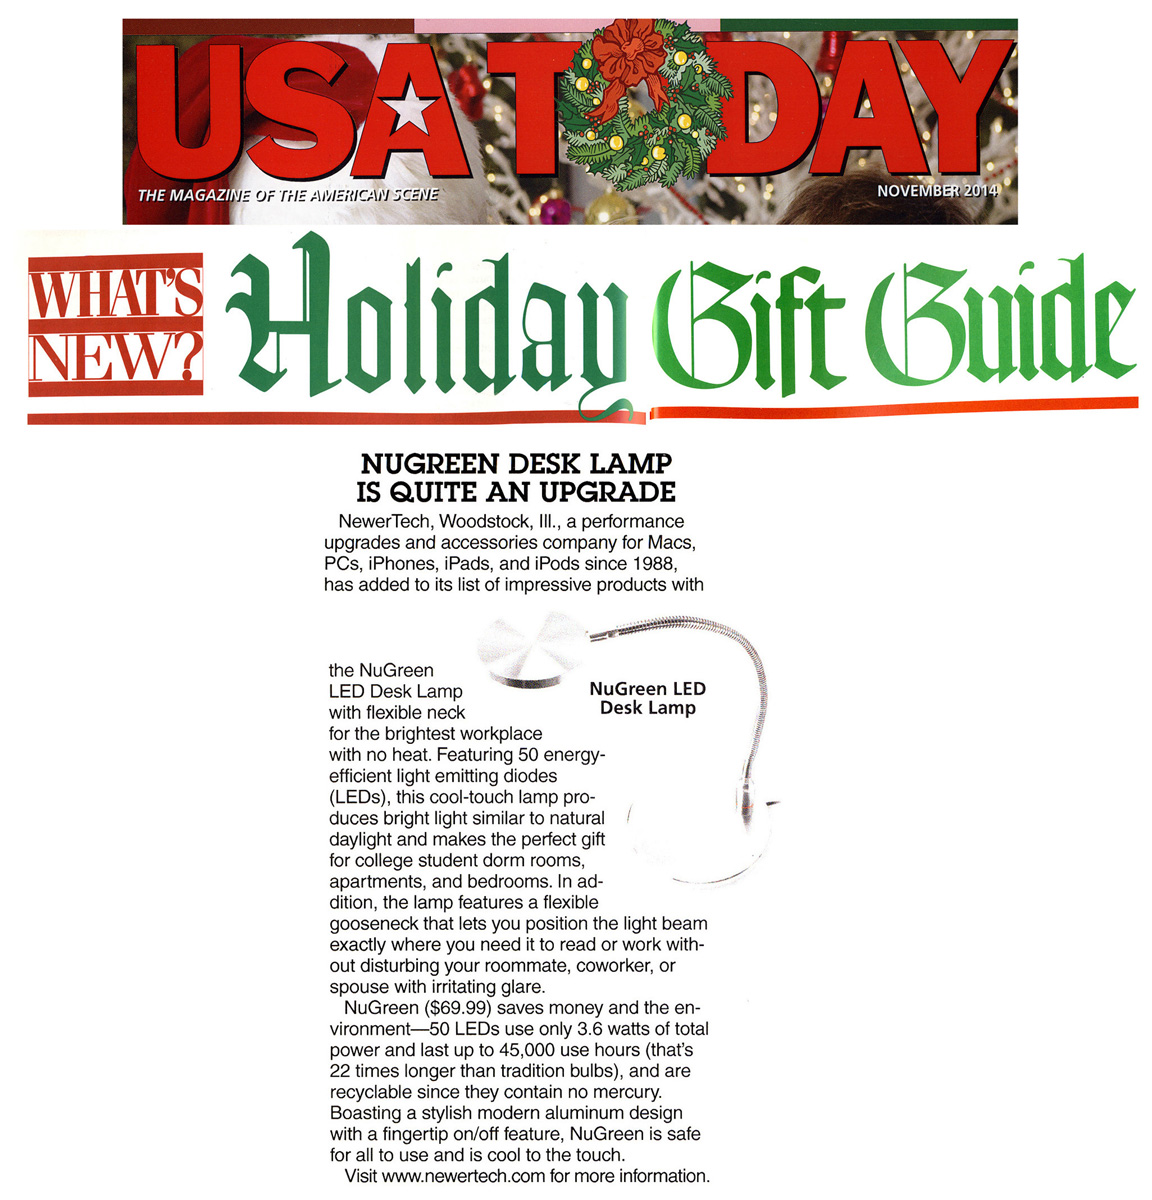 USA Today on NewerTech LED Lamp  Holiday Gift Guide 2014! "Makes the perfect gift for college student dorm rooms, apartments, and bedrooms." - USA Today